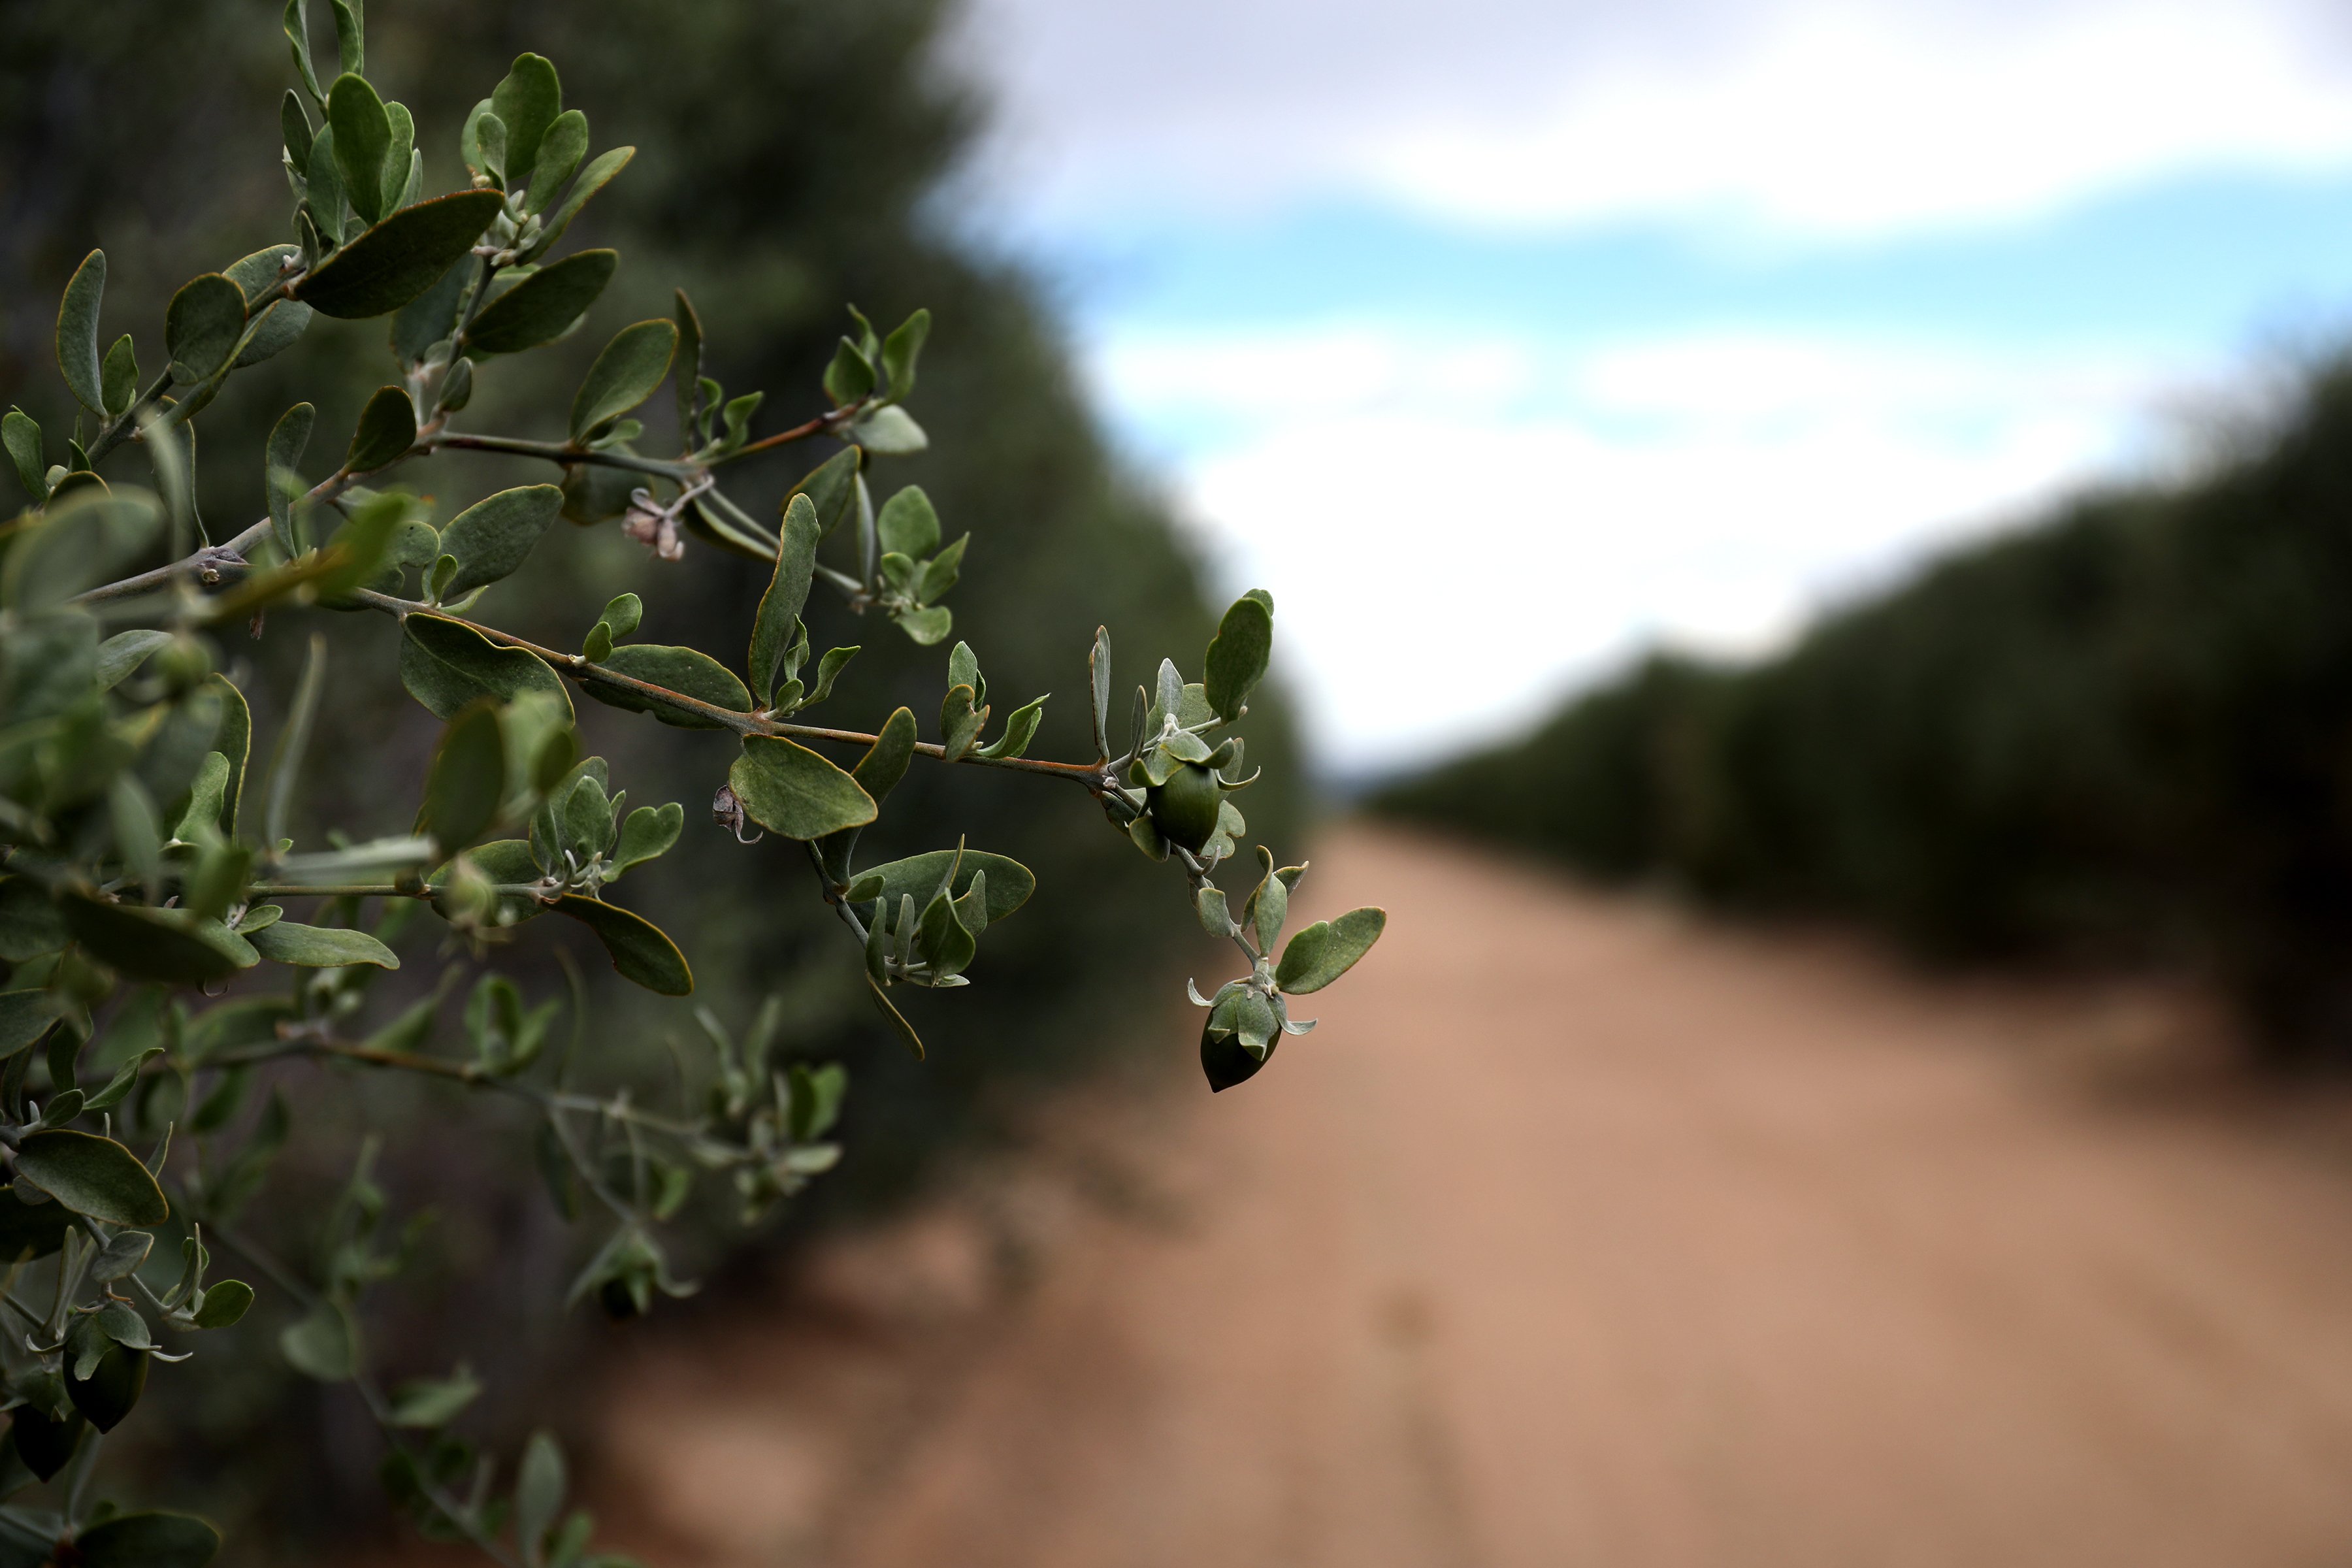 The young leaves of a jojoba shrub jut out into the crop row under the hot Arizona sun. 